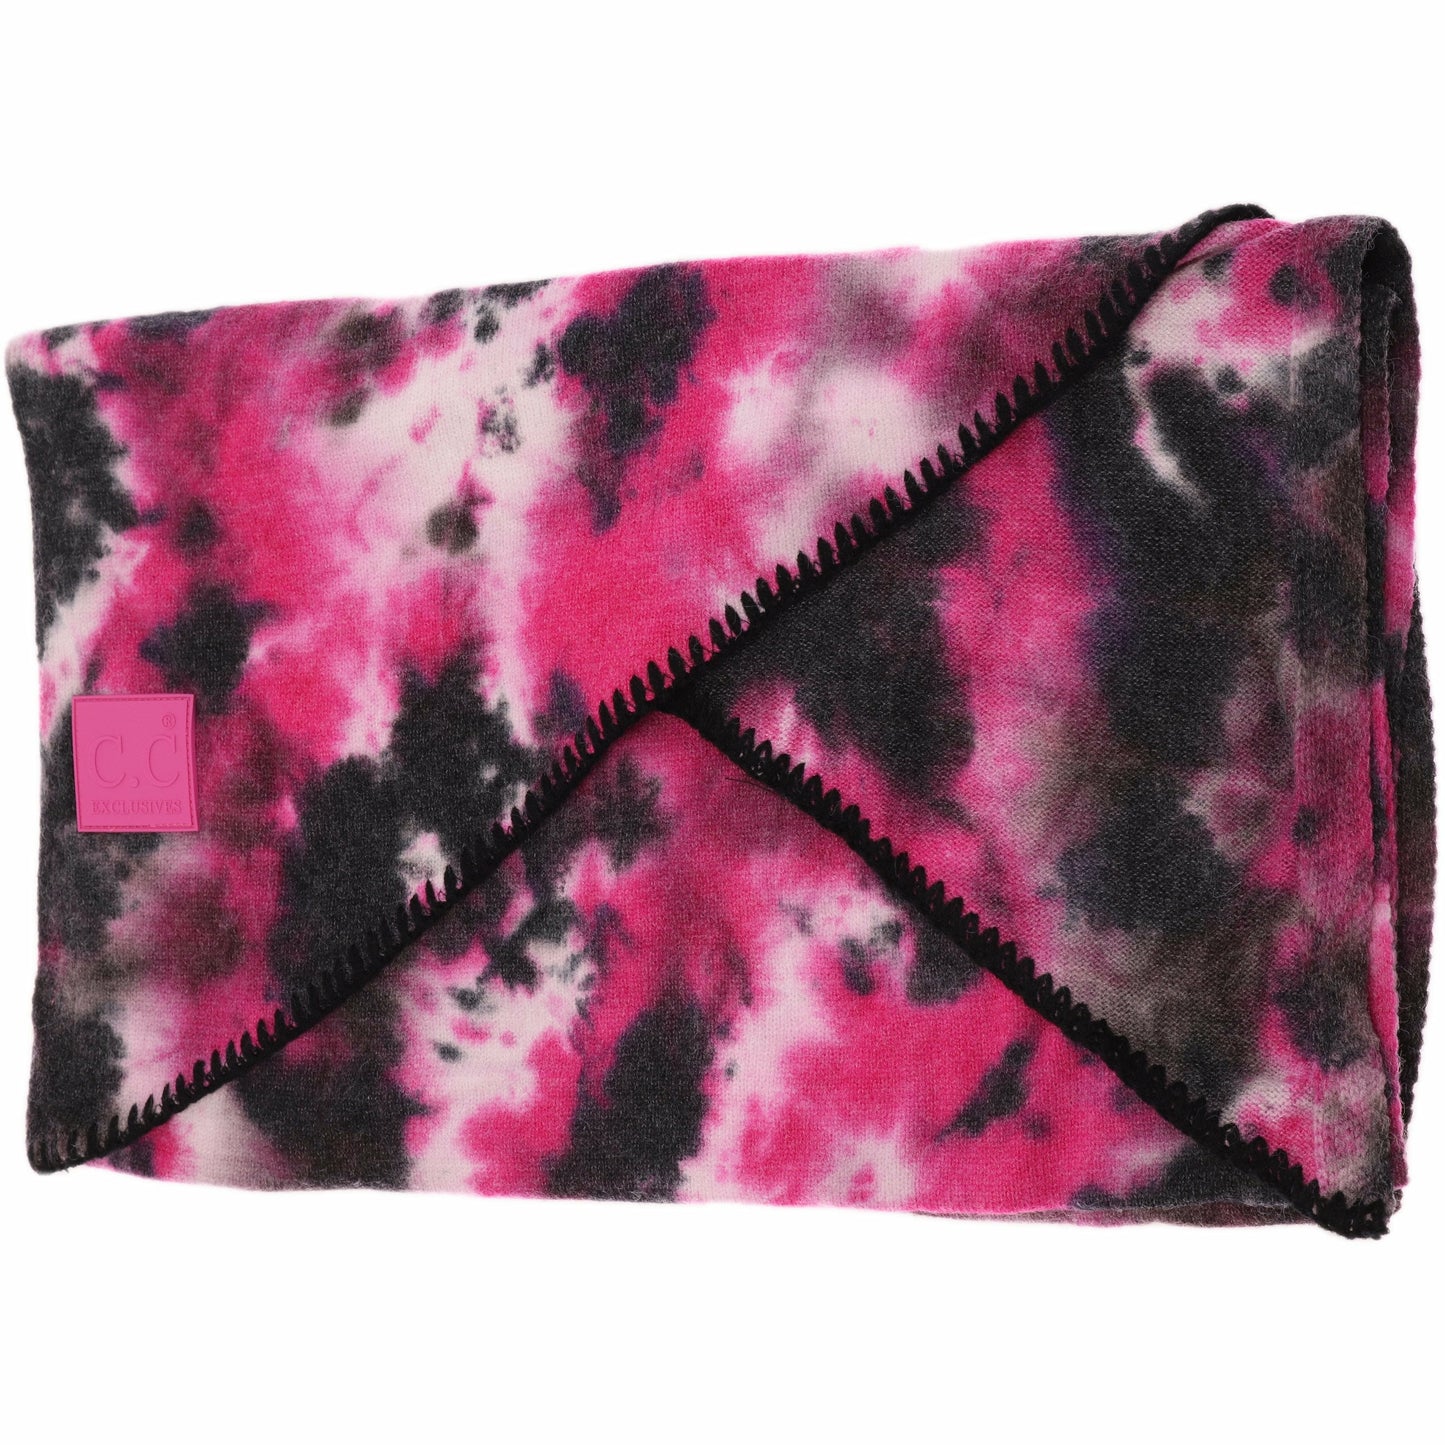 SALE CC BEANIE Tie Dye Scarf with Rubber Patch BLACK/HOT PINK